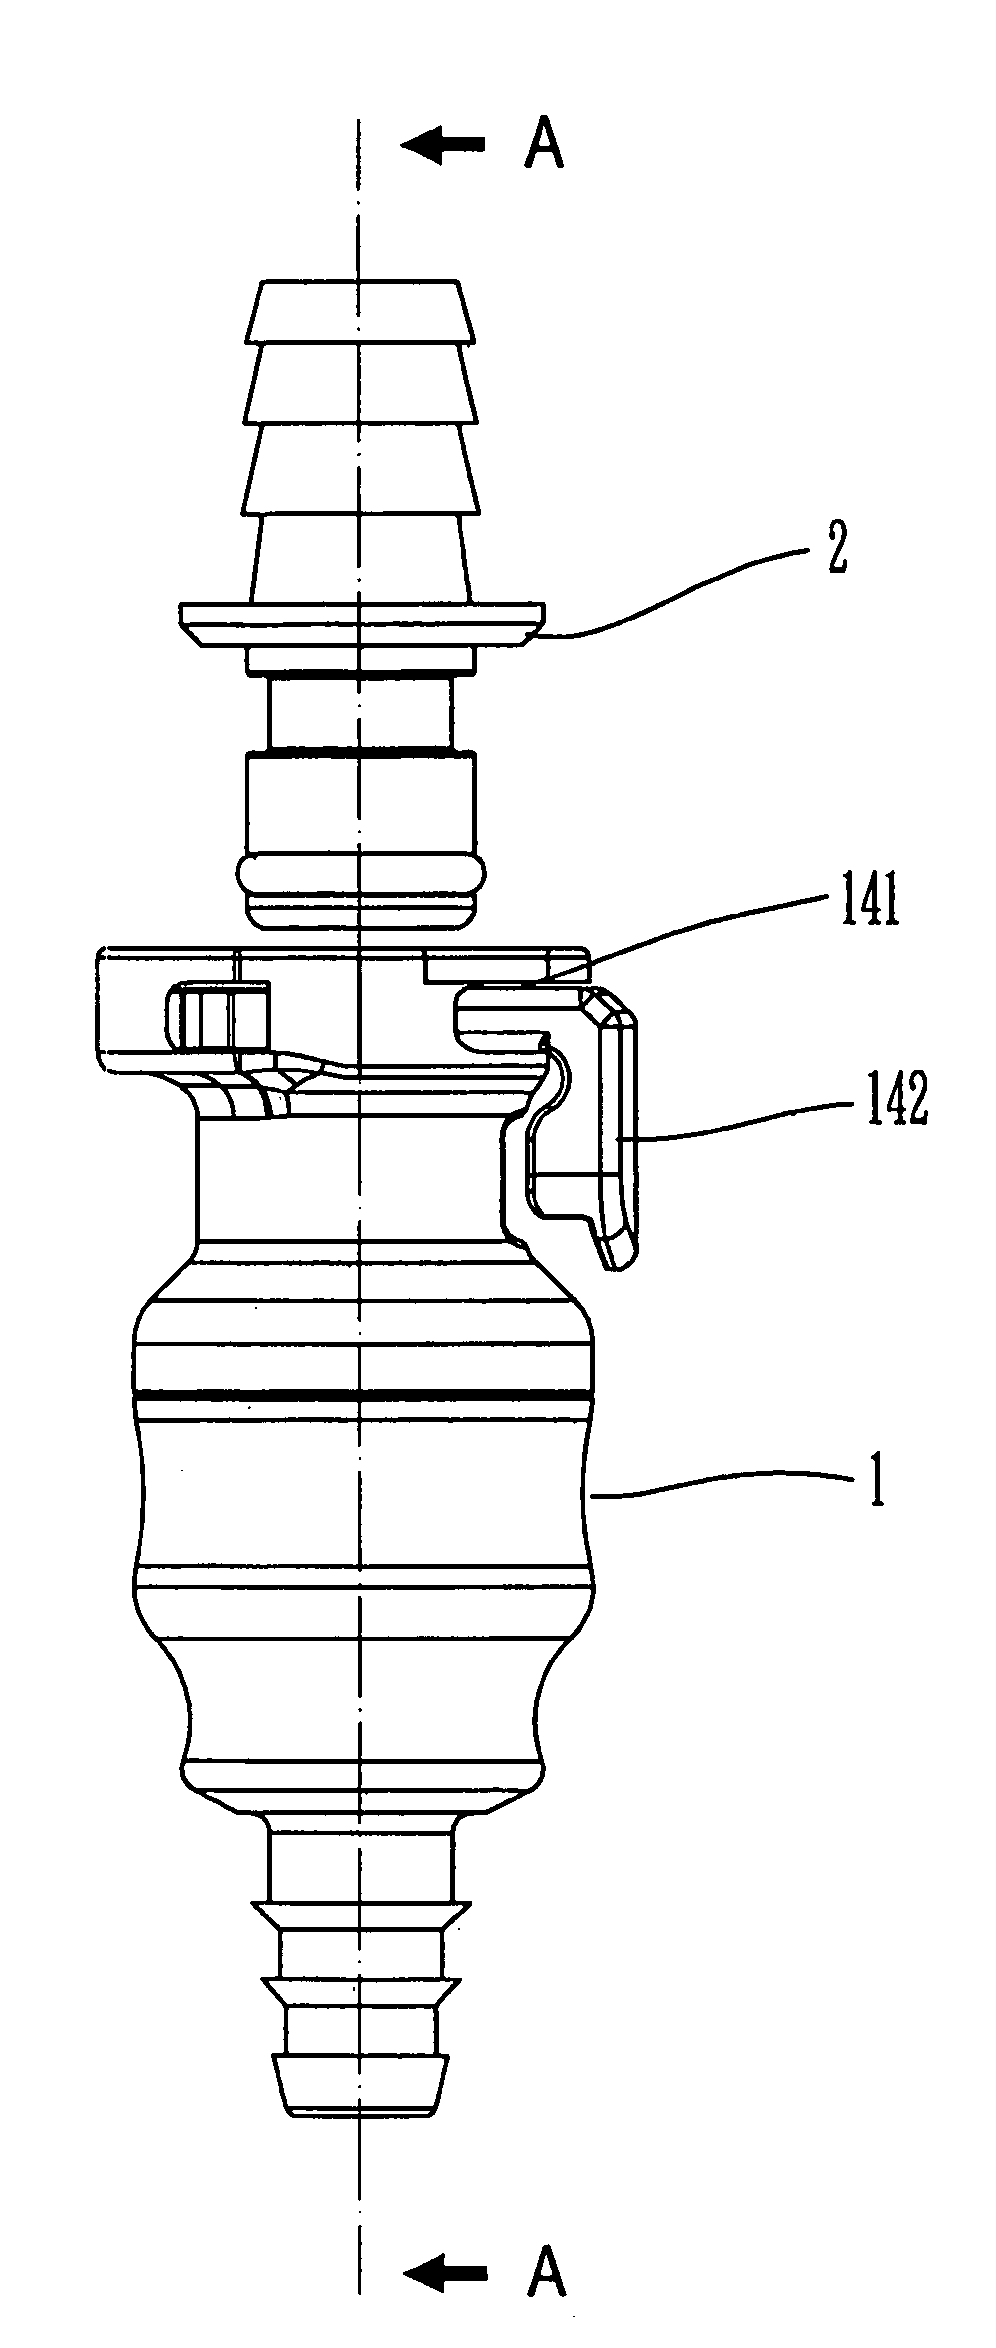 Coupling assembly with a core unit therein